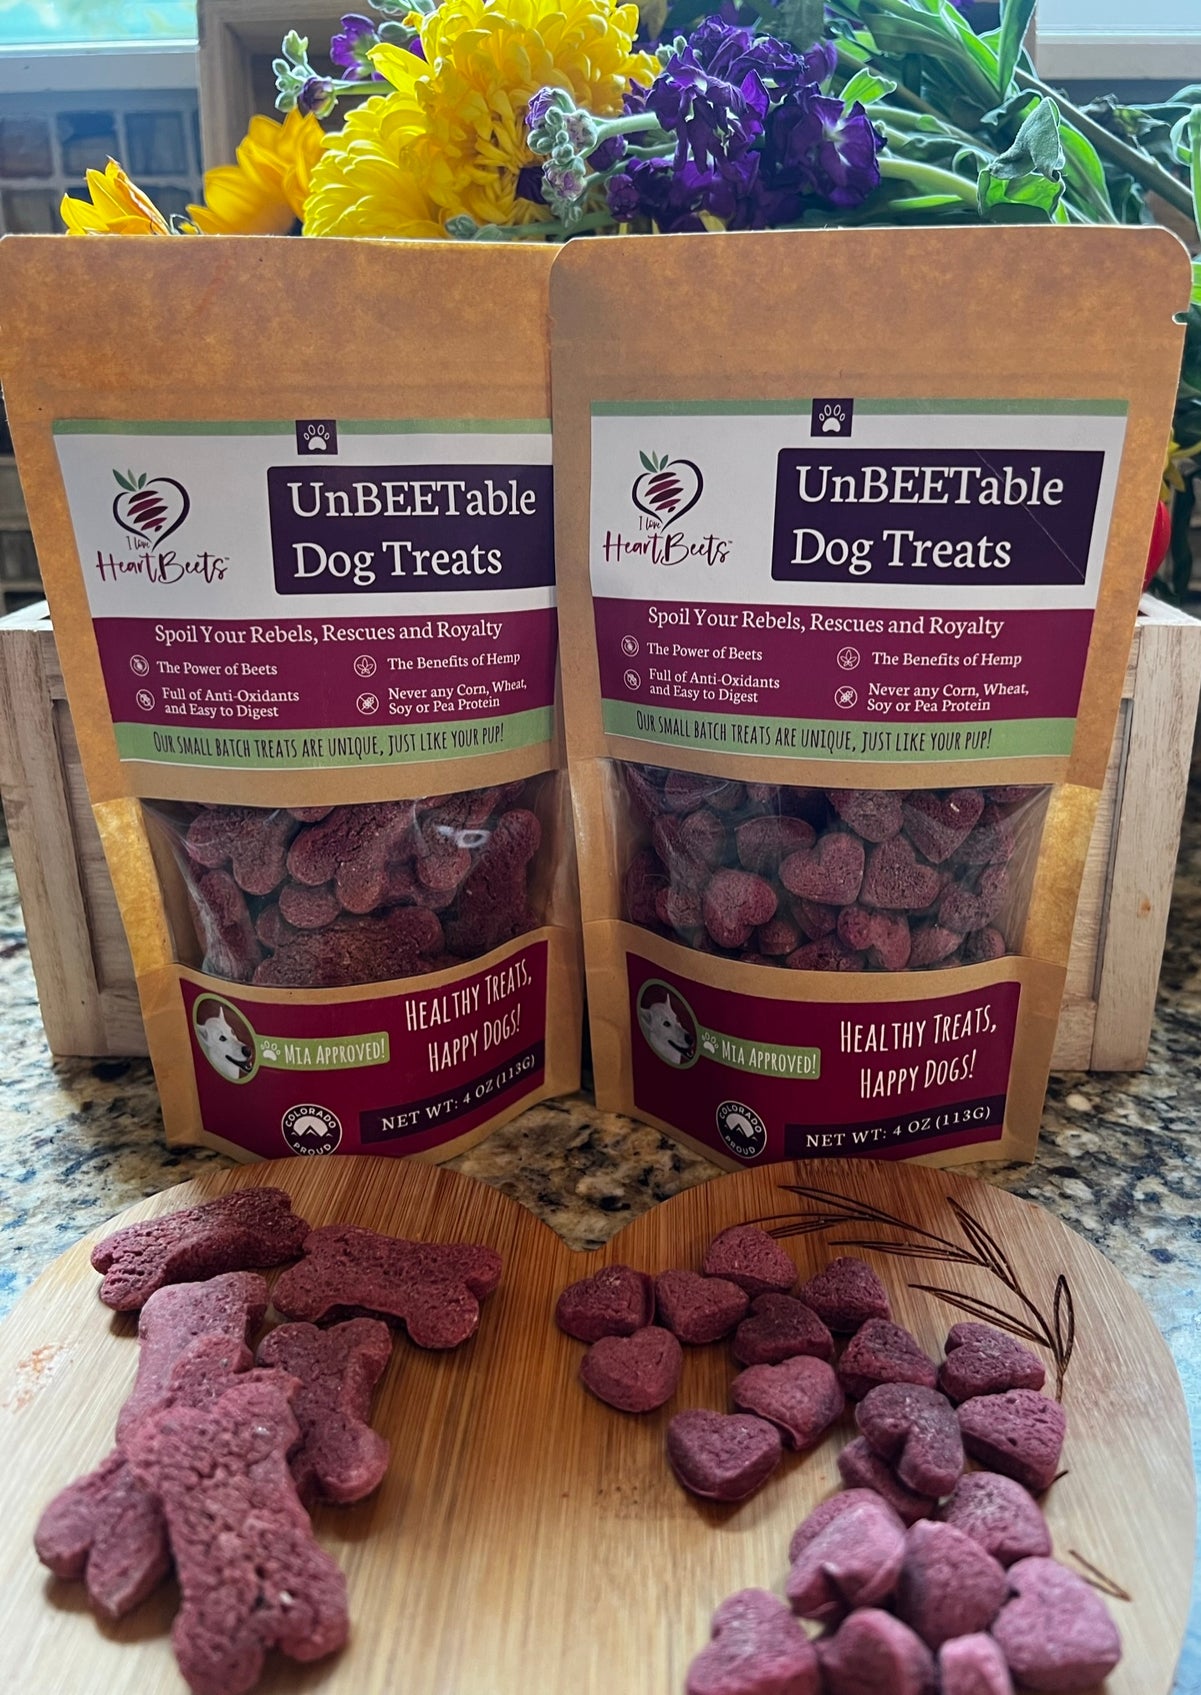 UnBEETable Dog Treats for Shipping